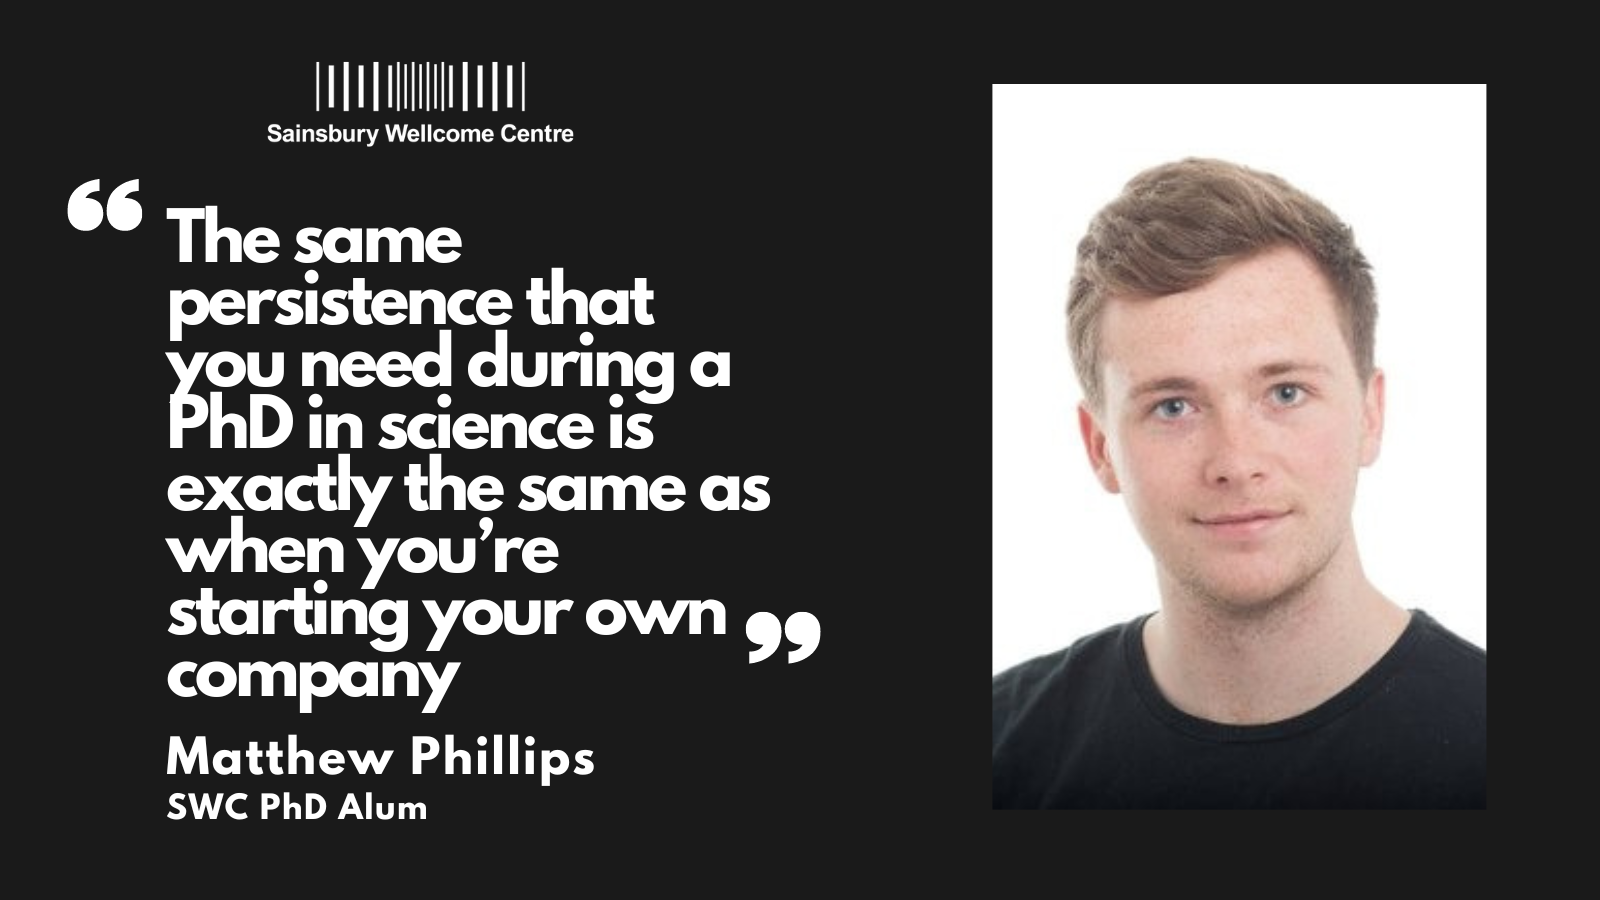 Photo of Matthew Phillips and quote "The same persistence that you need during a PhD in science is exactly the same as when you're starting your own company"